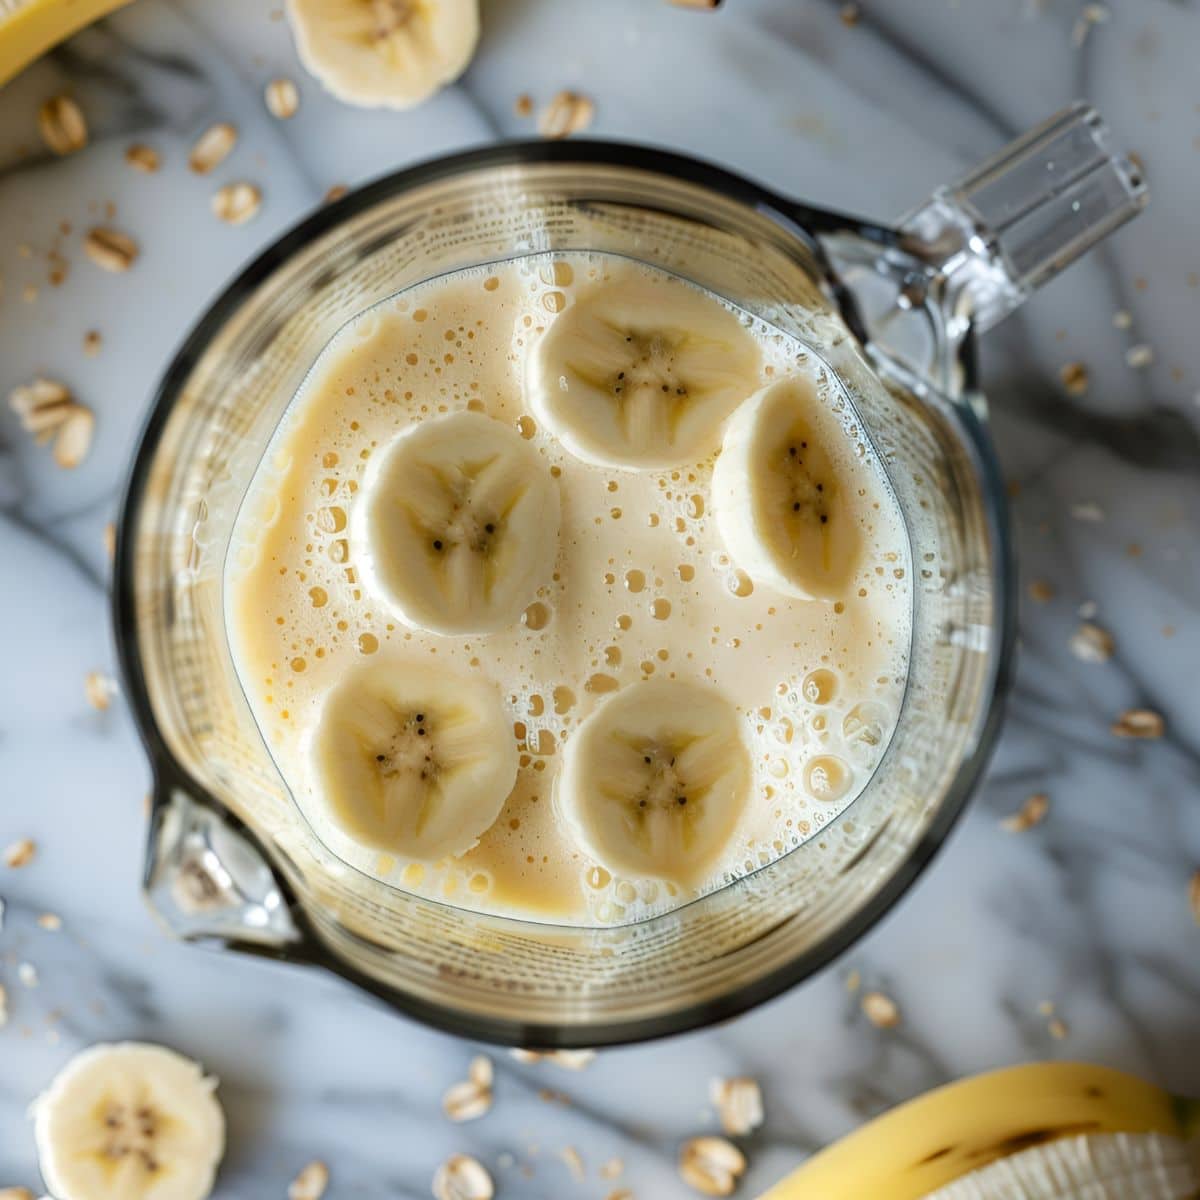 Top View of Banana Daiquiri in a Blender with Slices of Banana